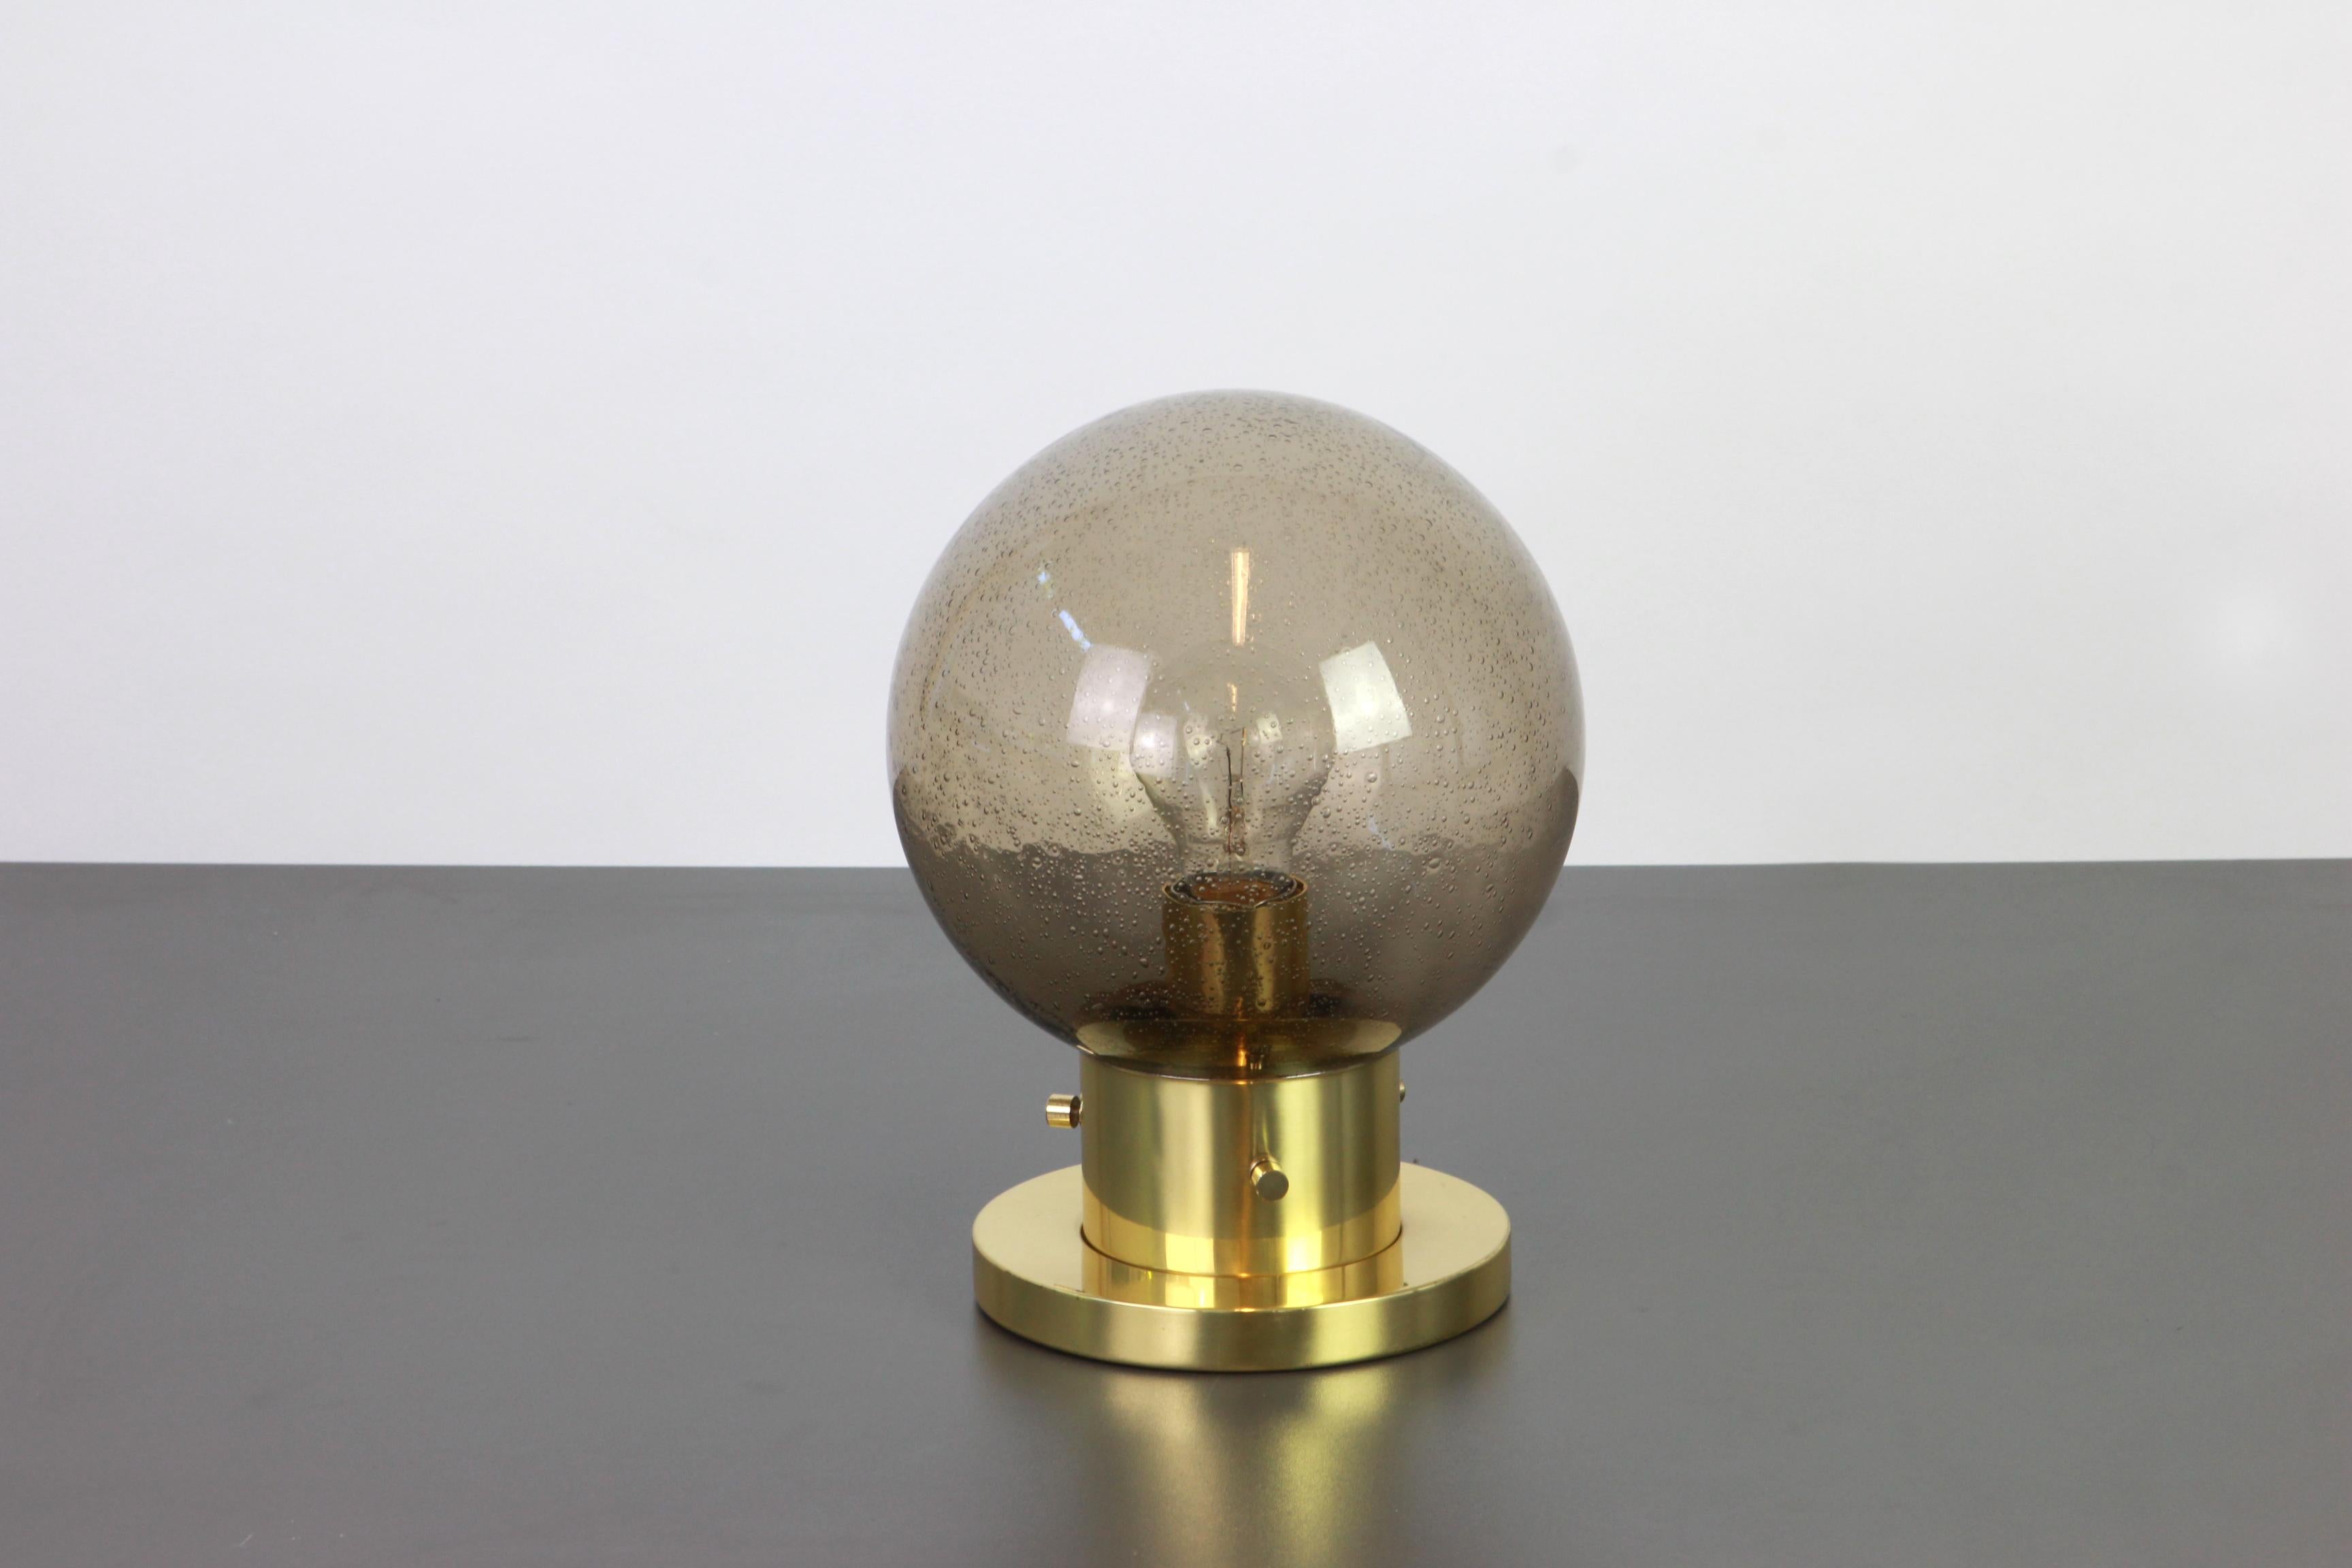 Stunning midcentury ceiling or wall lamp in Ball shape, by
Glashütte Limburg, Germany, 1970s.
Made of smocked glass and brass.
Sockets: It needs 1 x E27 standard bulb and function on voltage from 110 till 240 volts.

Measures: Height ca. 28 cm